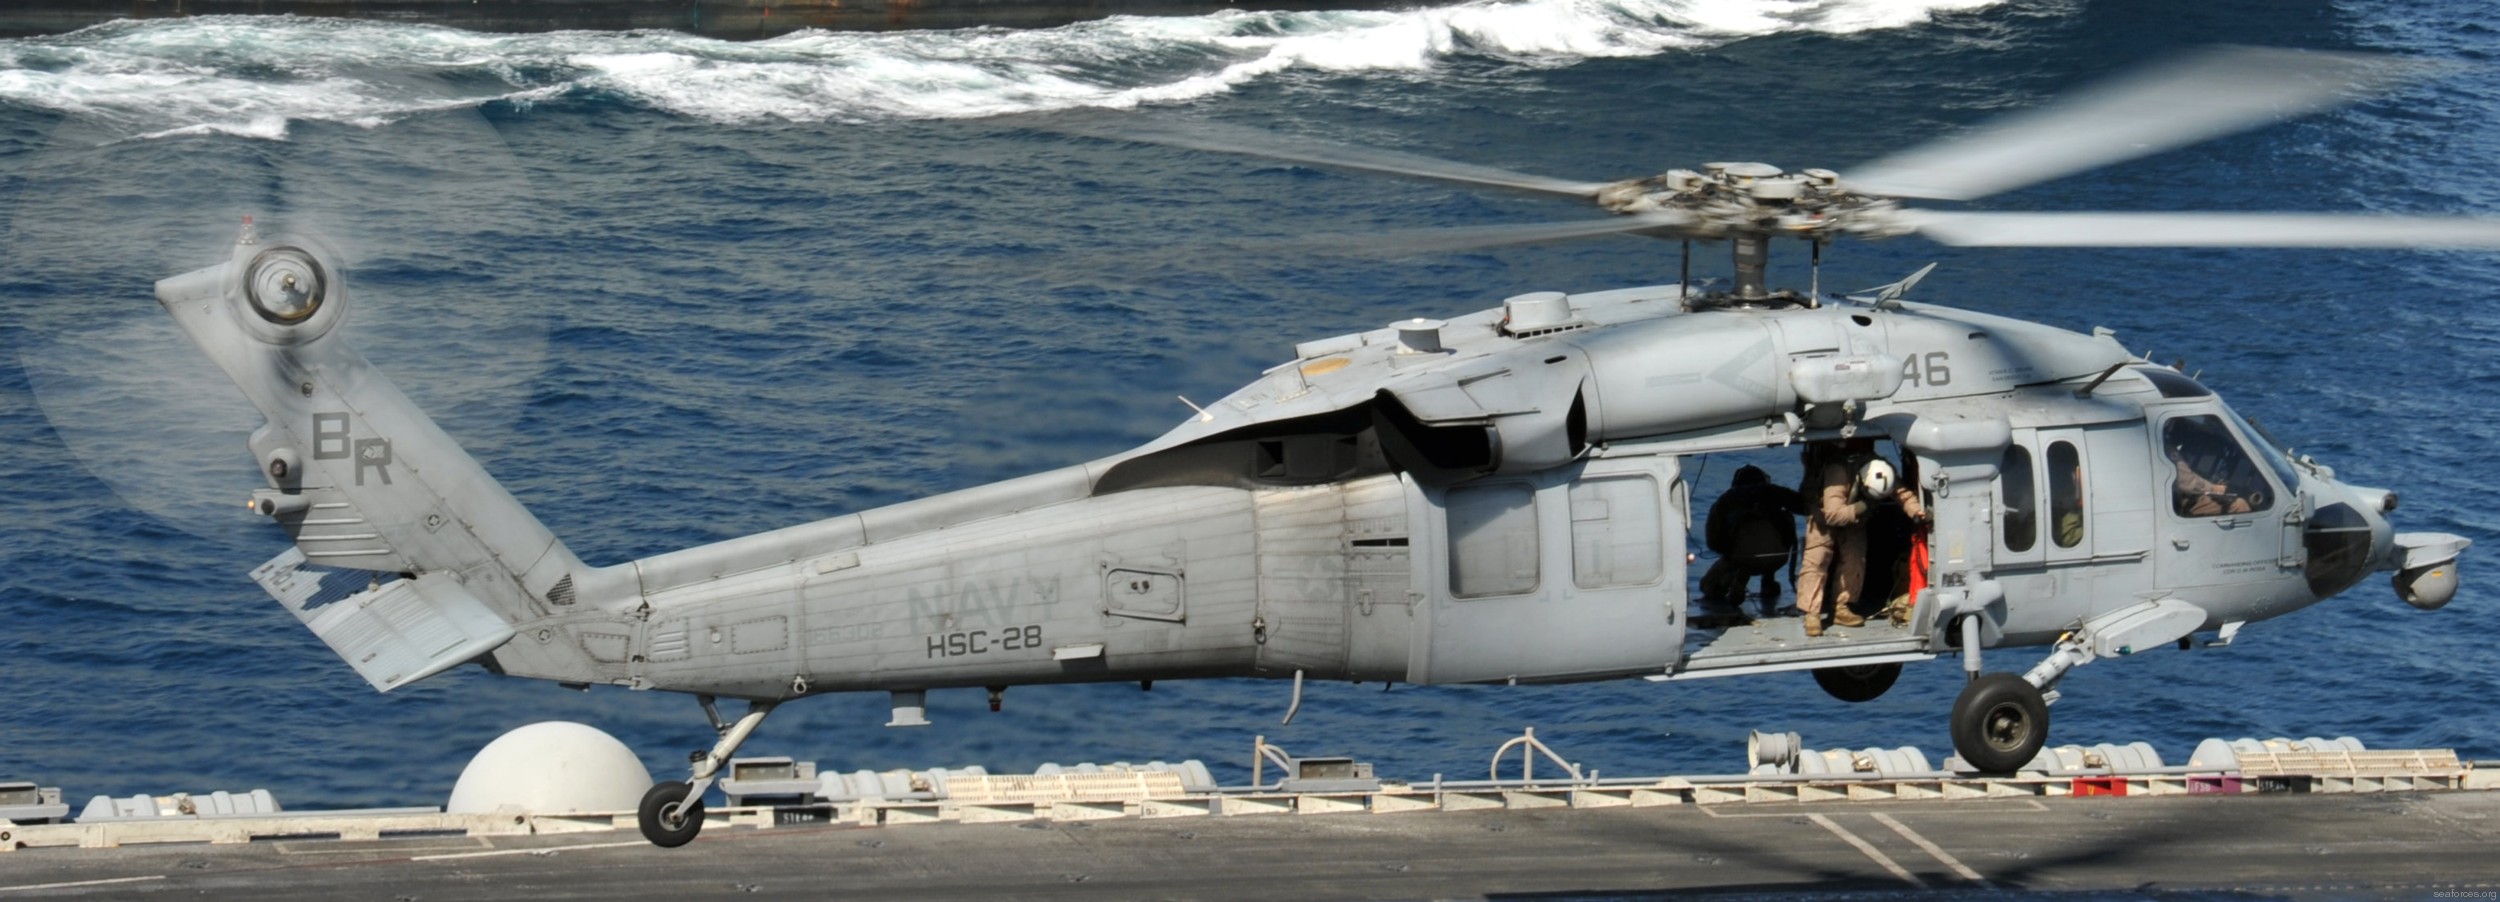 hsc-28 dragon whales helicopter sea combat squadron mh-60s seahawk us navy 240